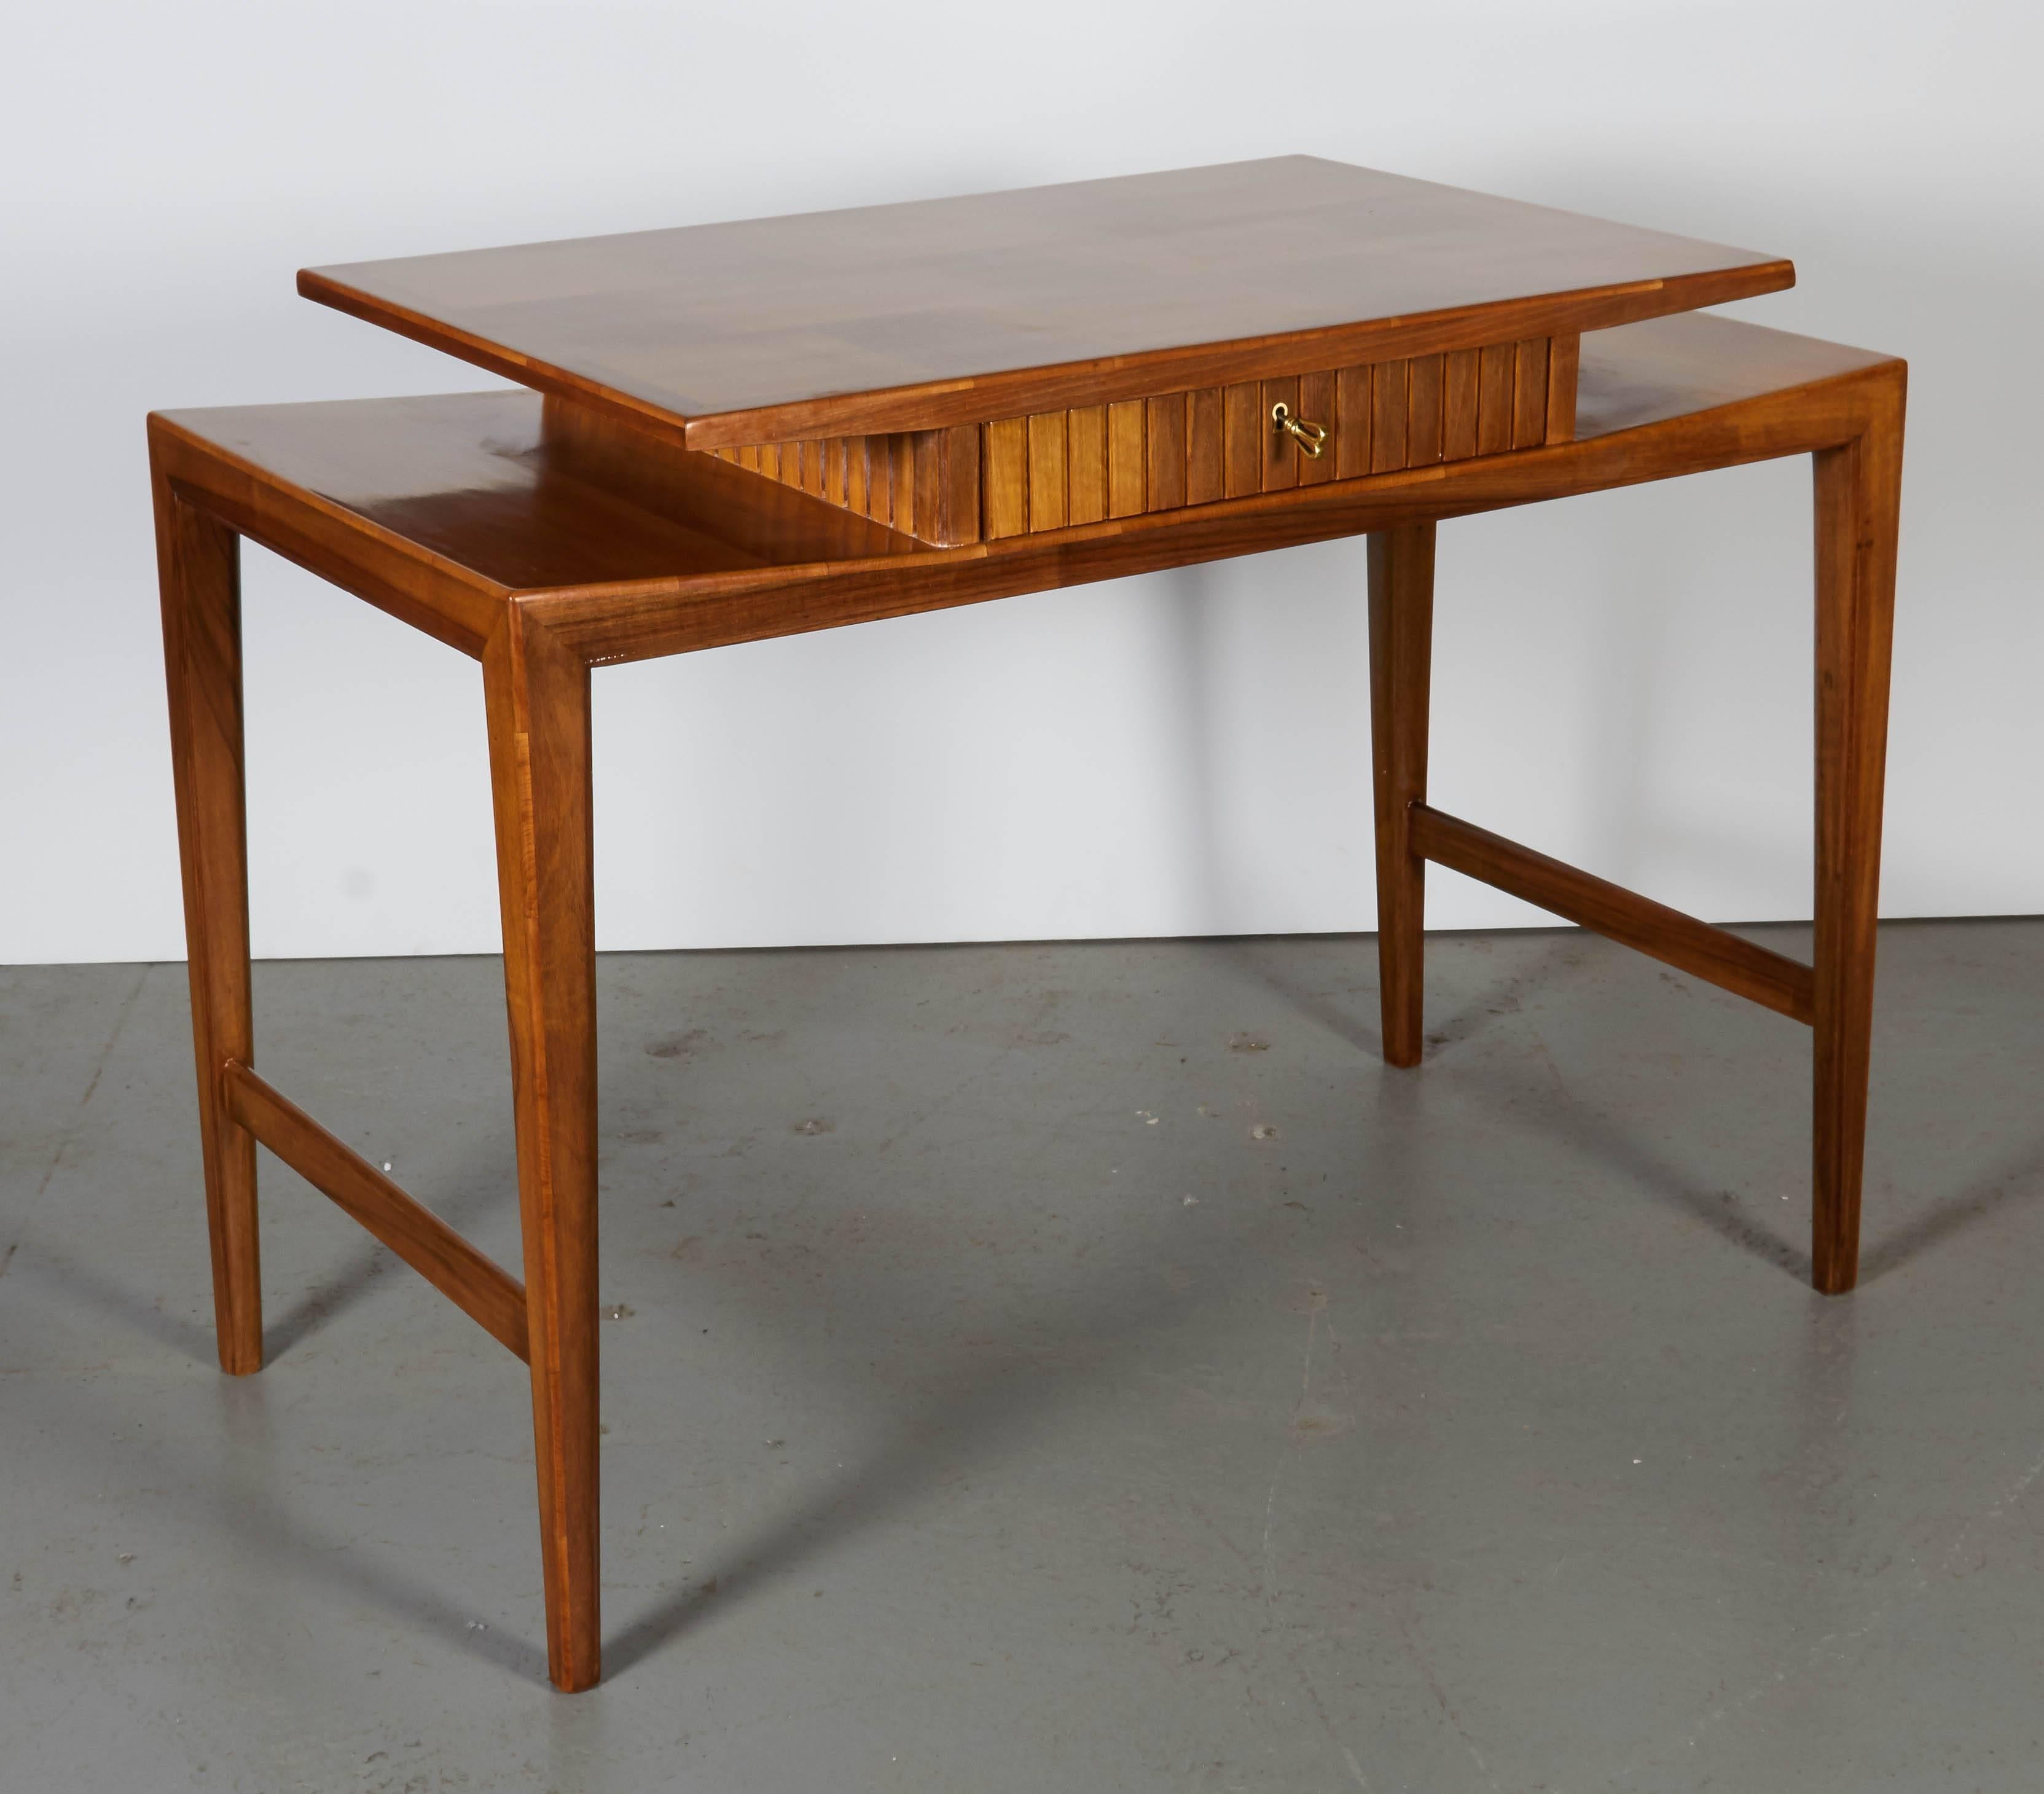 Writing desk by Gio Ponti.
Measures: Height 27.5